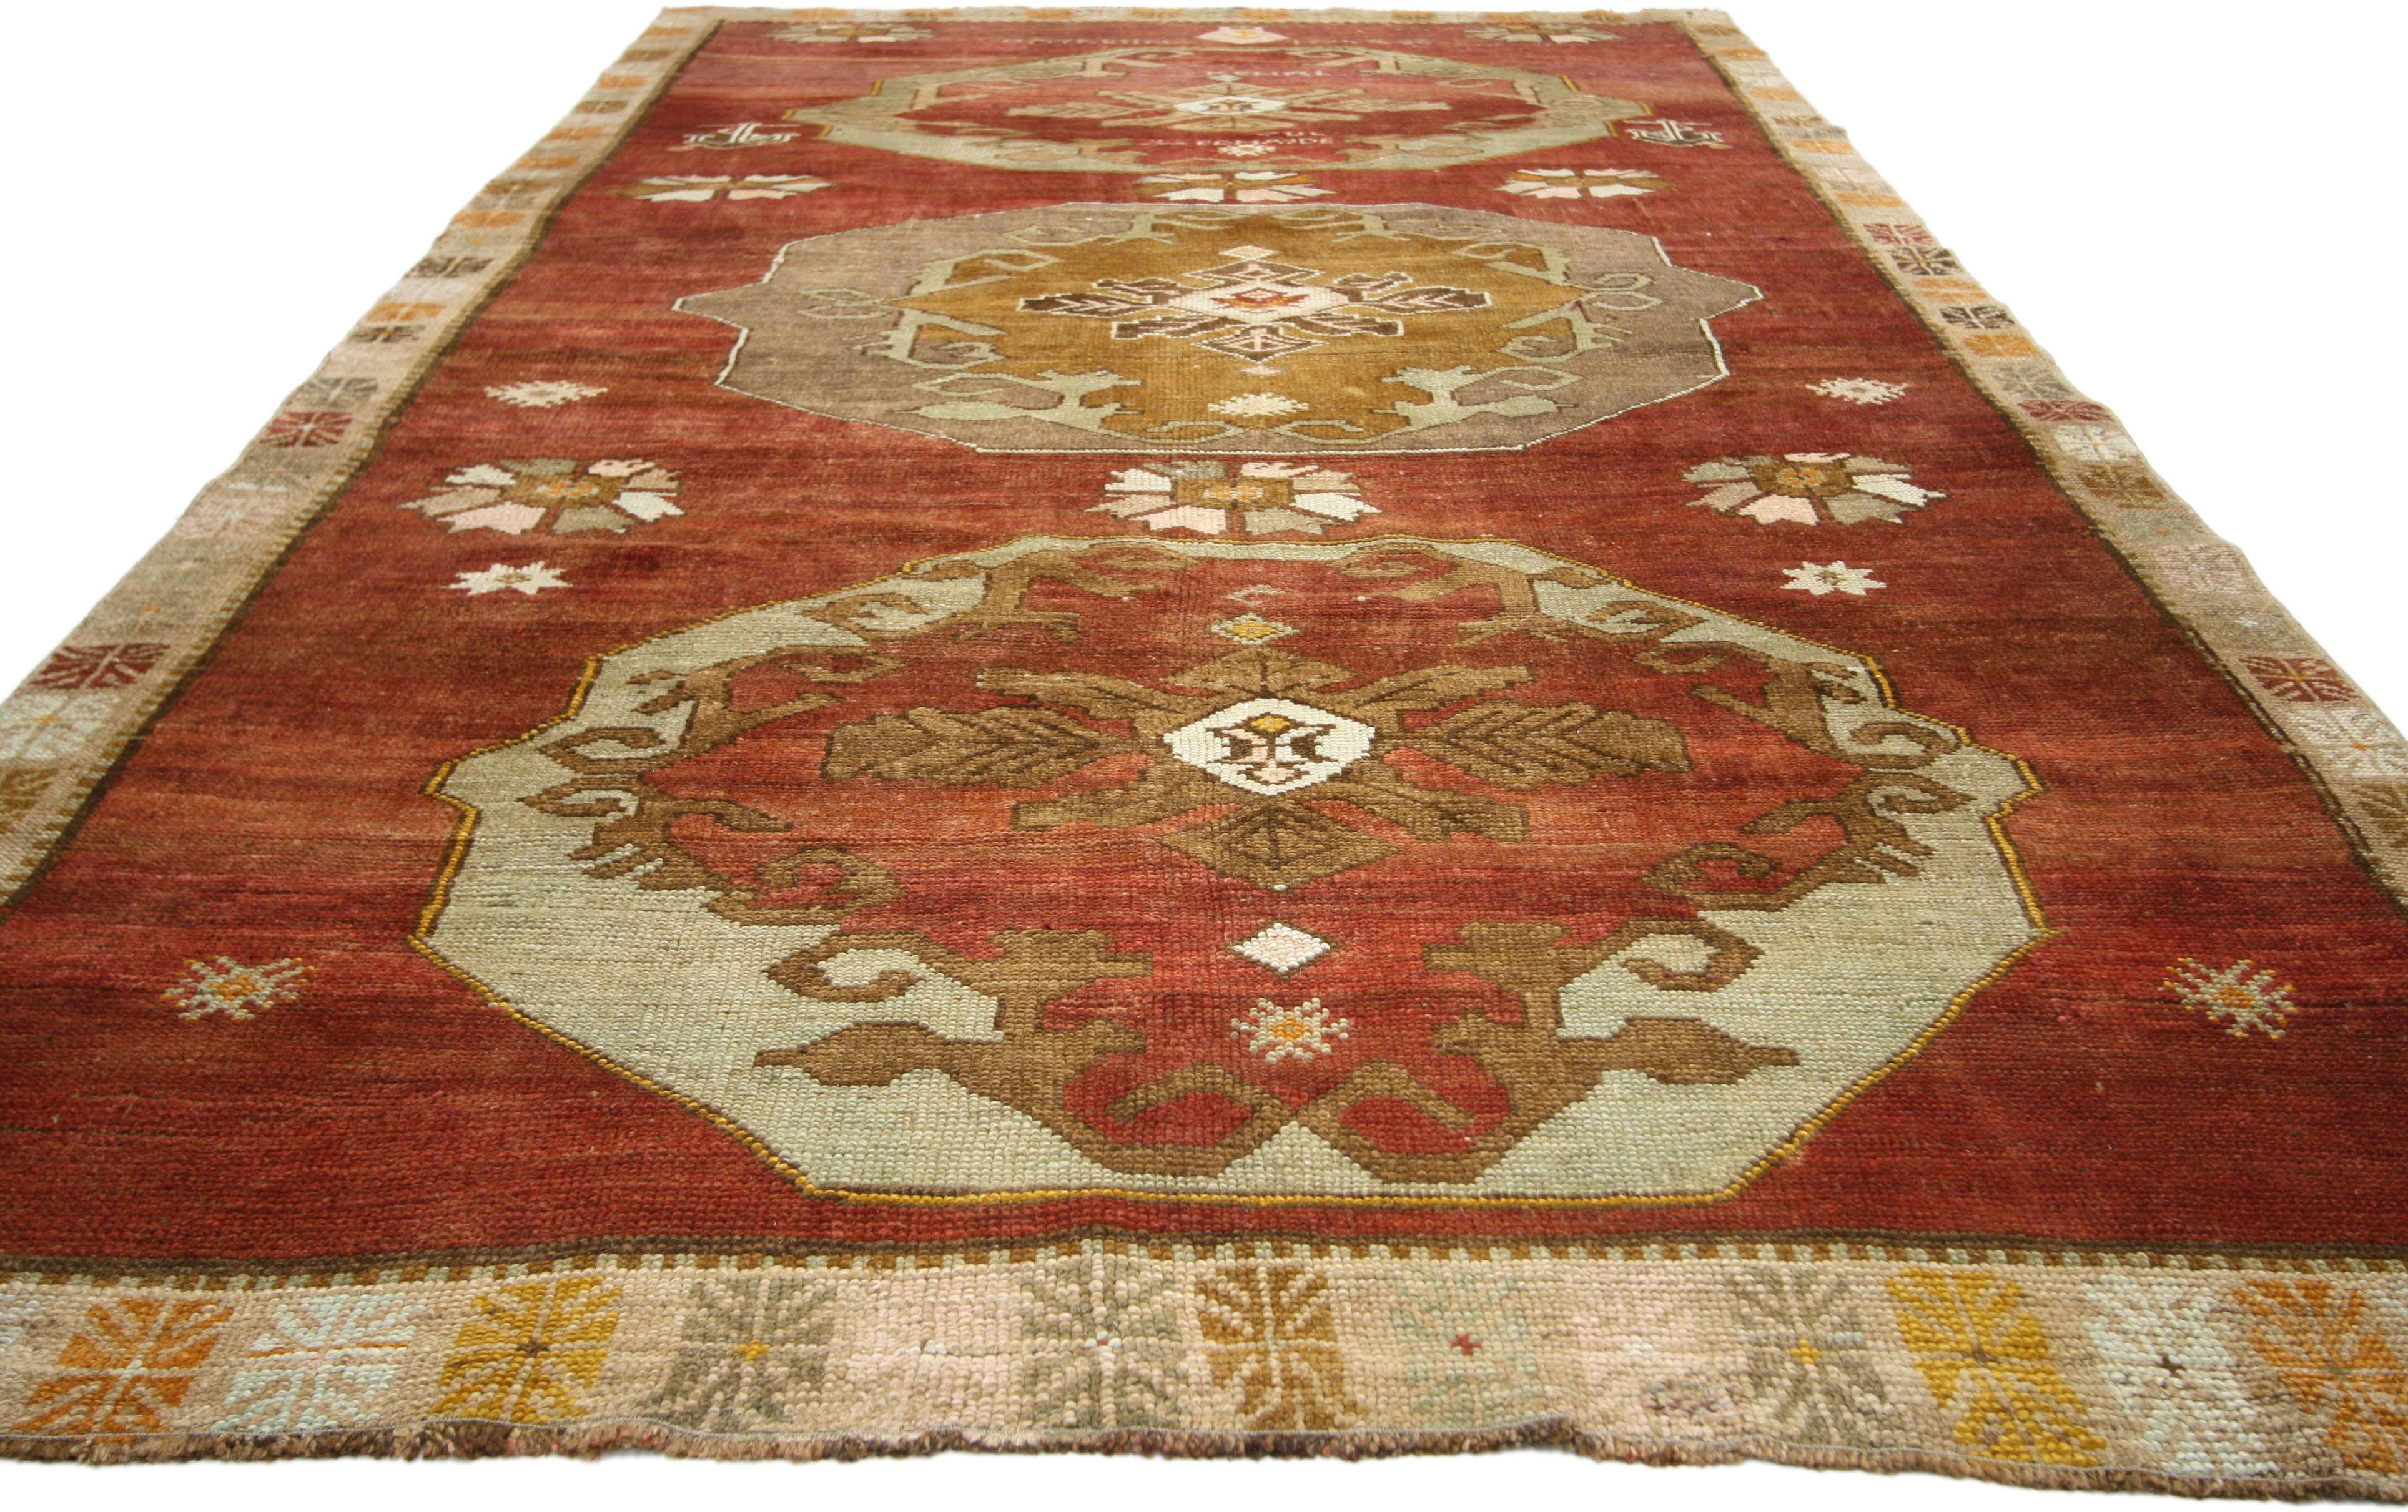 Vintage Turkish Oushak Gallery Rug with Jacobean or Tudor Style In Good Condition For Sale In Dallas, TX